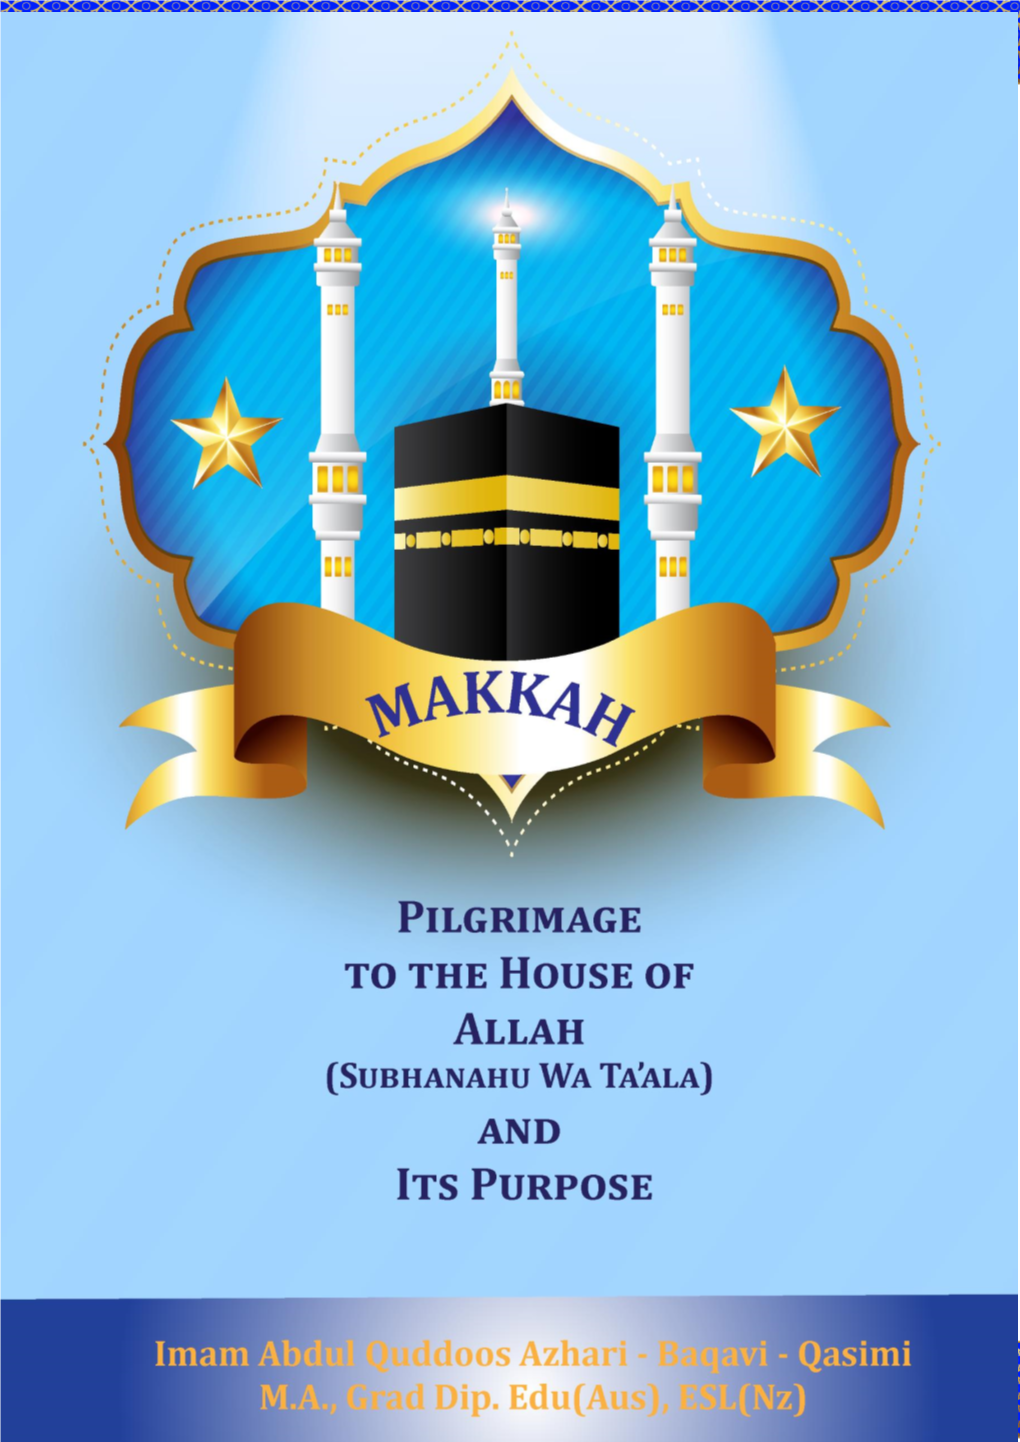 Pilgrimage to the House of Allah and Its Purpose 15